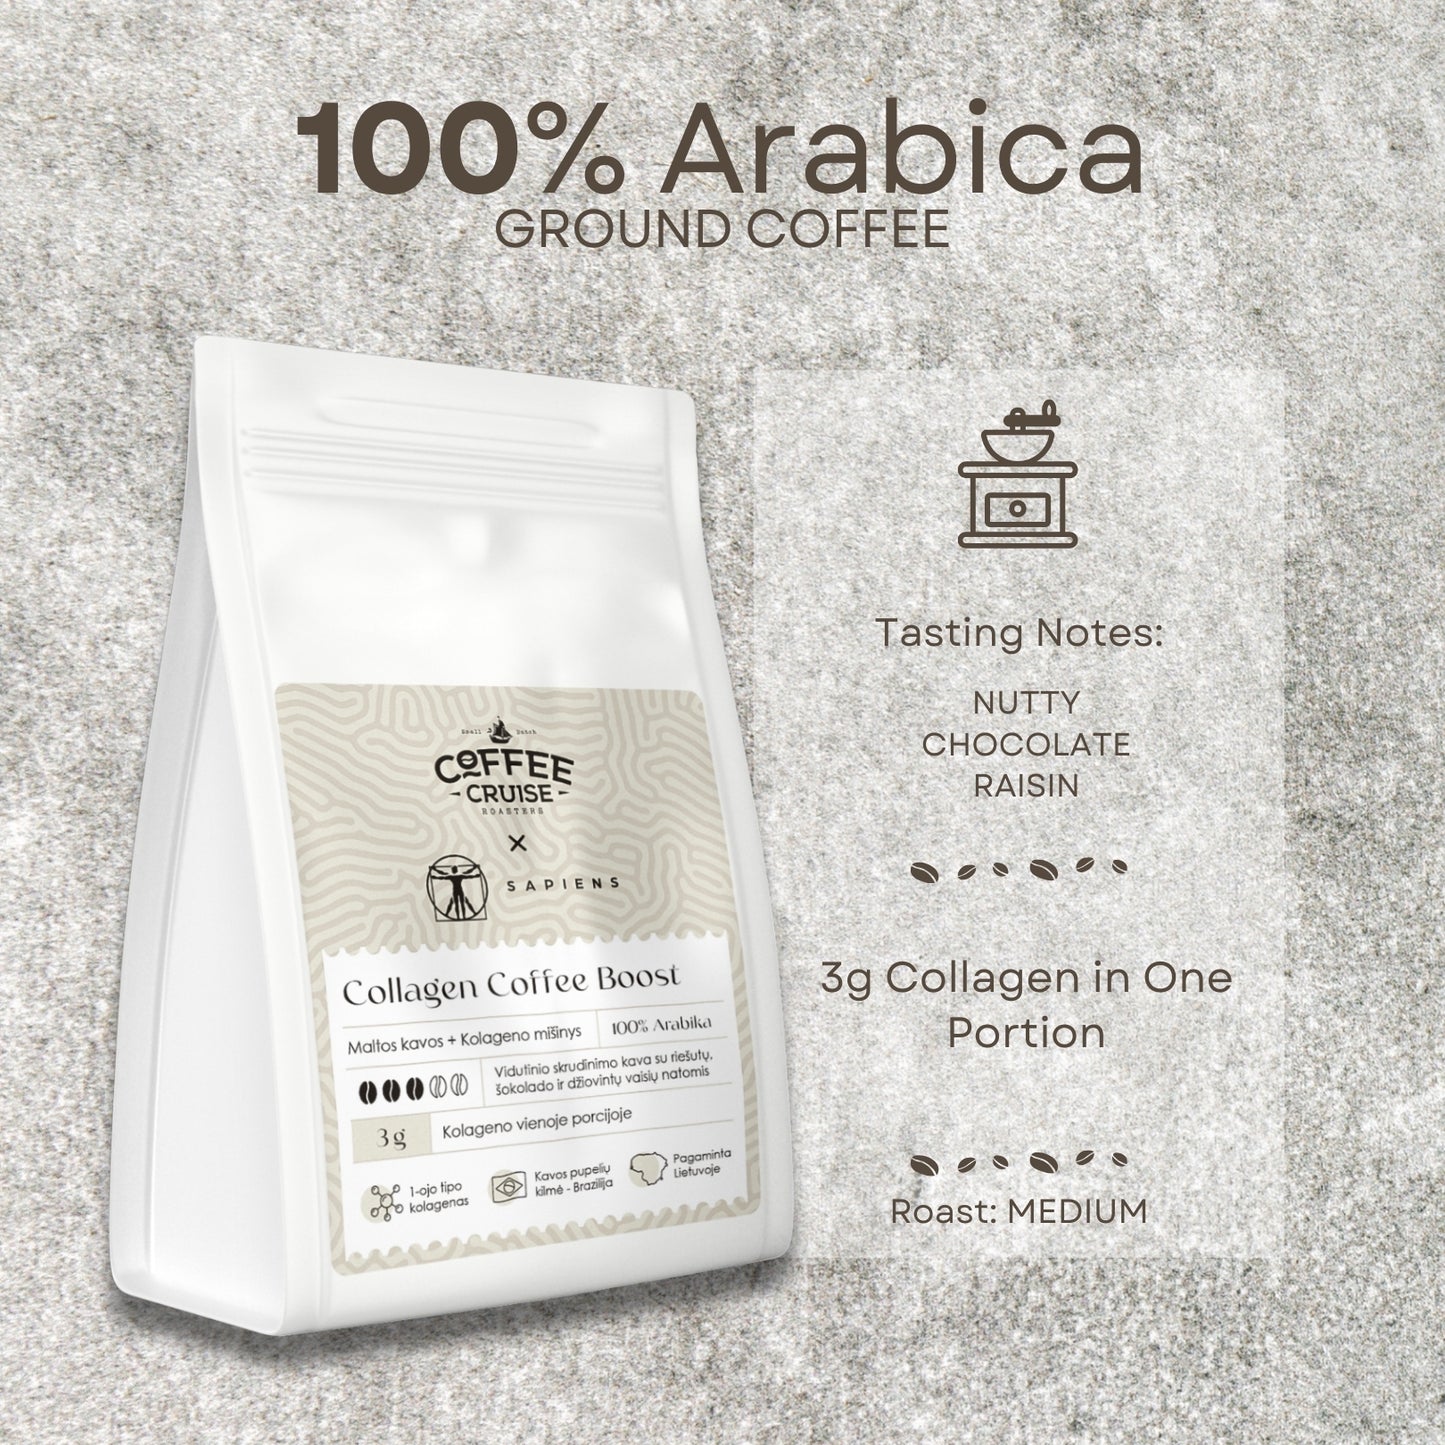 COFFEE CRUISE Ground Coffee with Collagen 250g - Medium Roasting - Aroma Caramel and honey - For All Coffee Machines - 100% Arabica